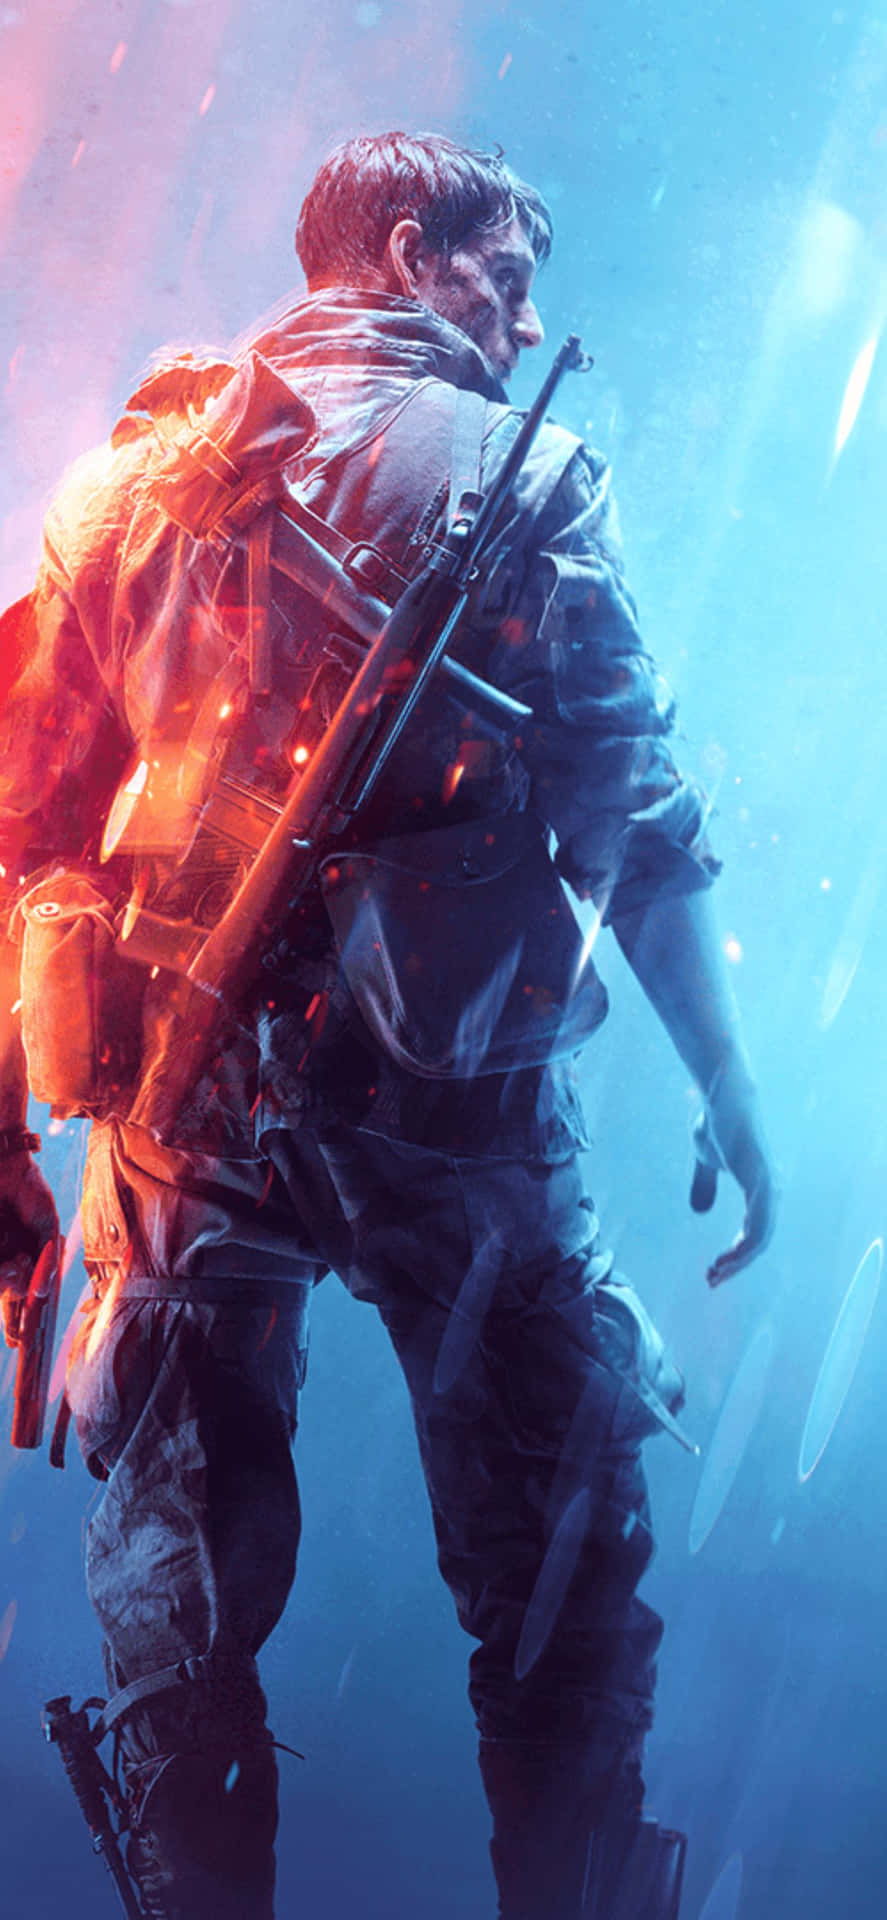 Iphone Xs Max Battlefield V Soldier Back Background